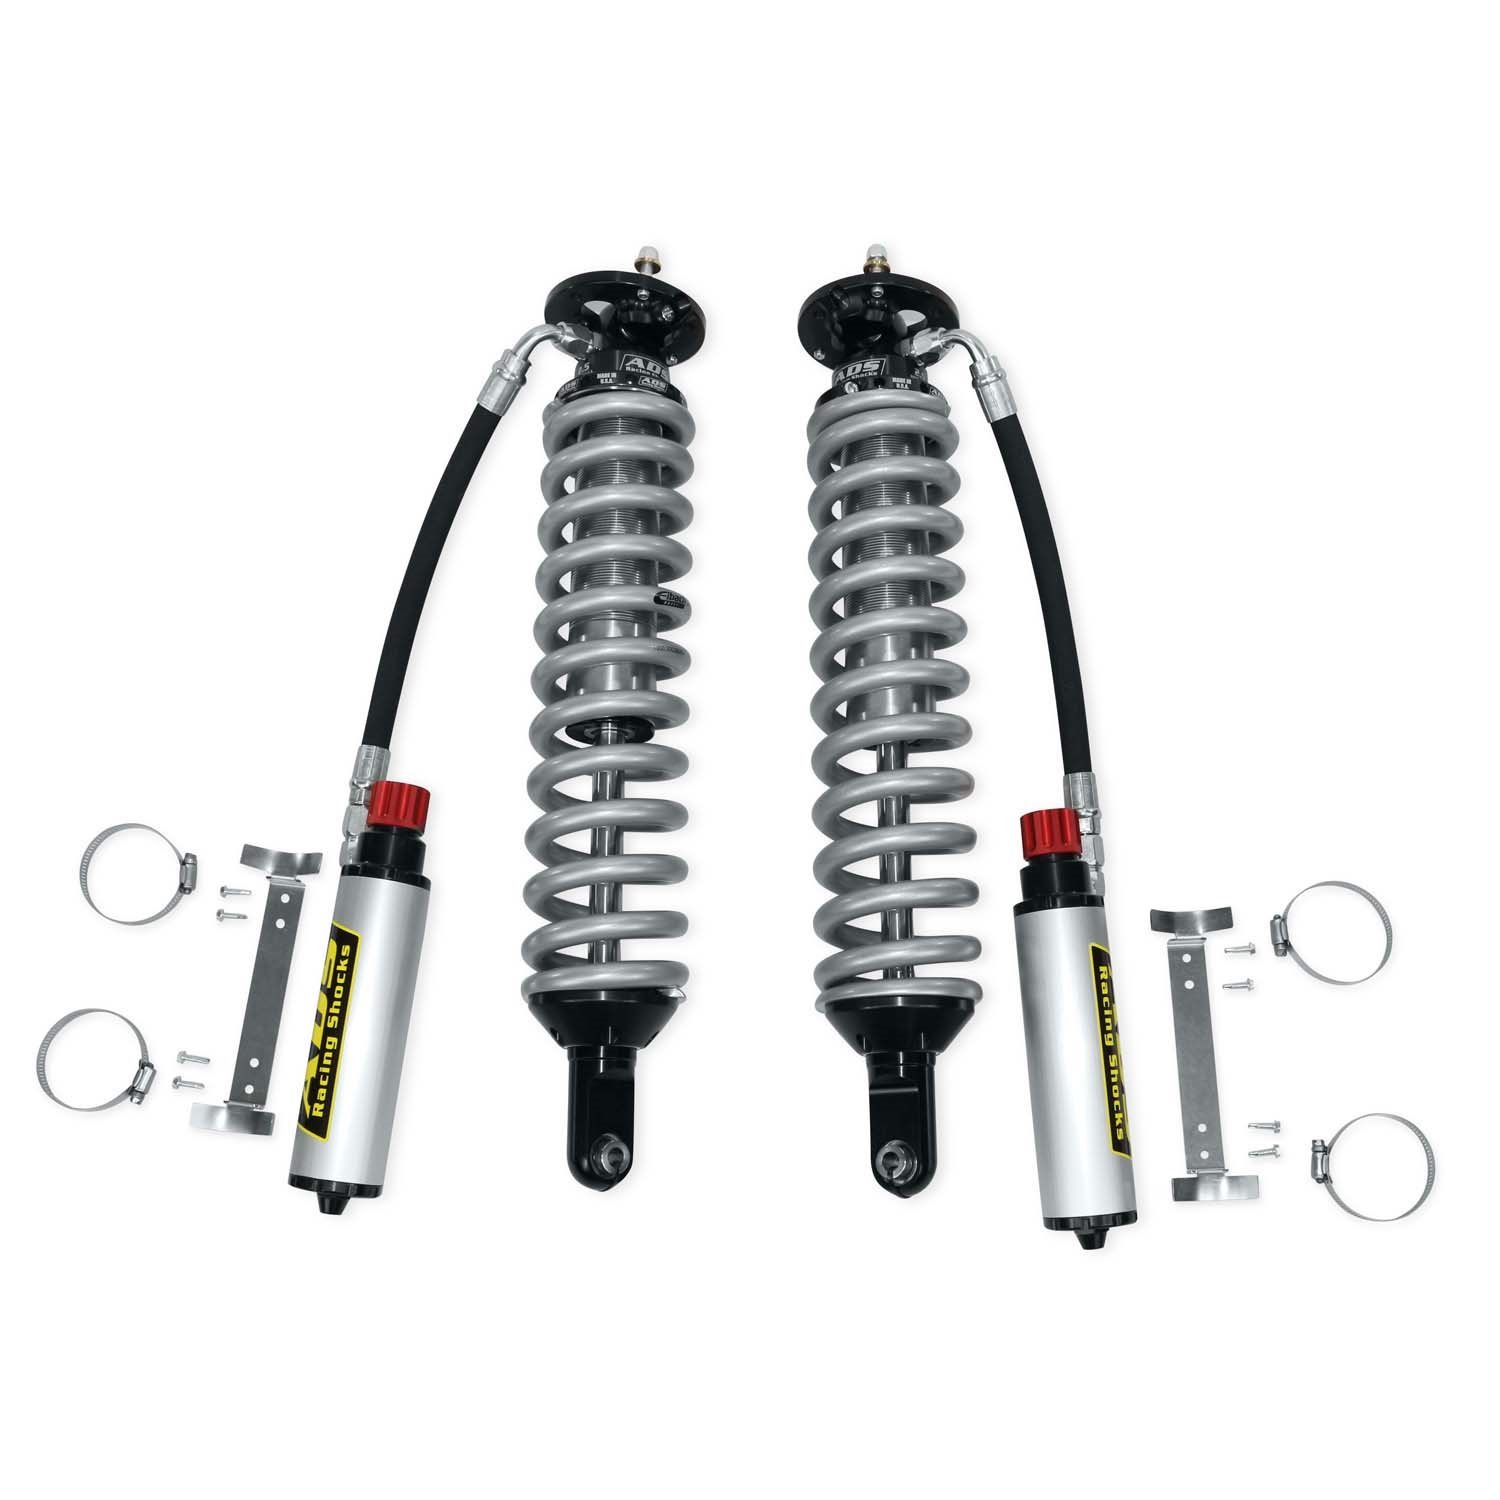 250-TT05L-A00 Racing Bolt-On Shocks, Fits Select Toyota Tacoma, 2.5 in., Long Travel Shock w/ Clicker Reservoir